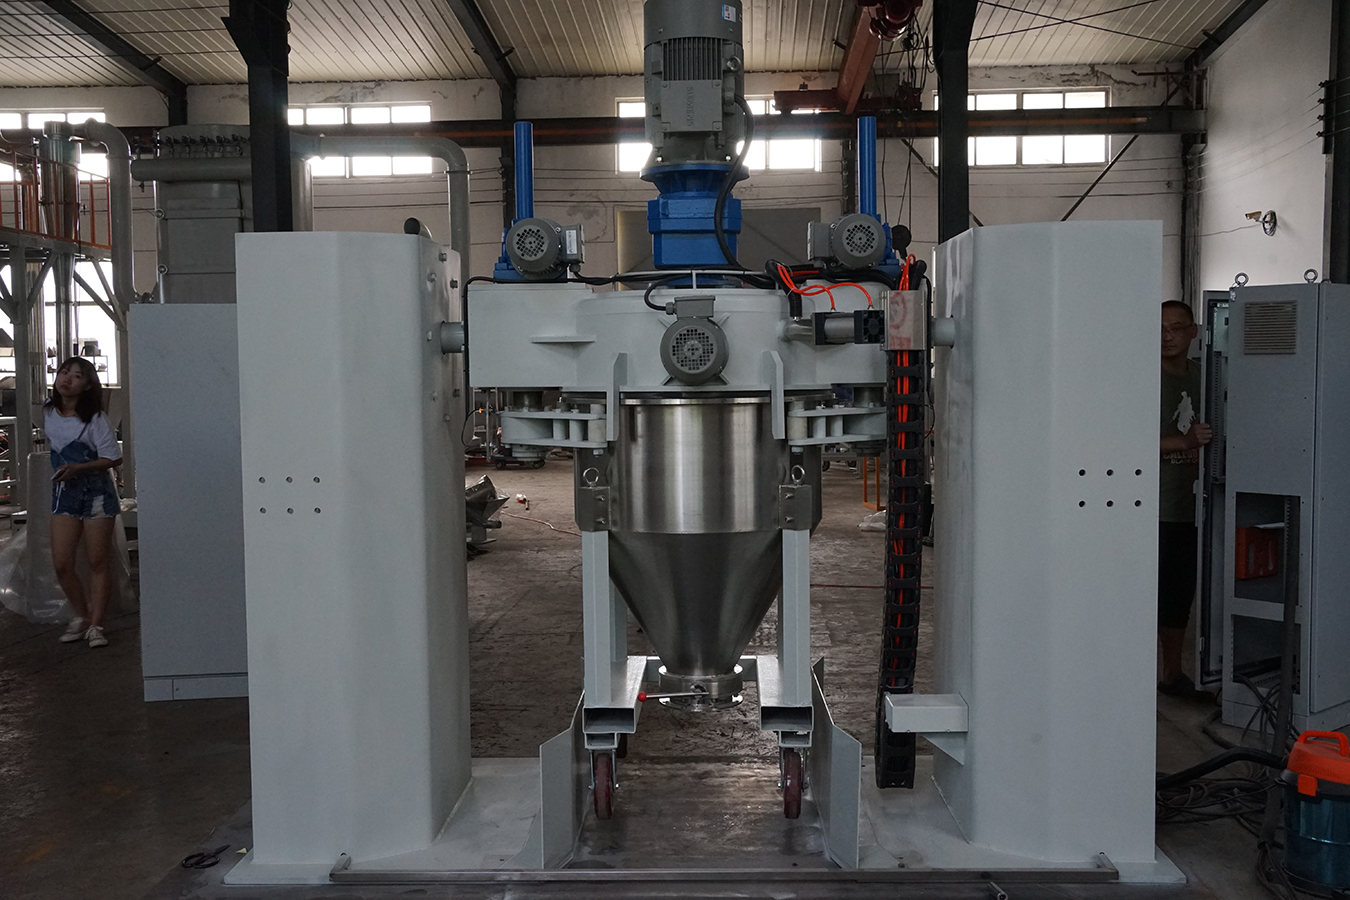 Automatic Pneumatic Electrostatic Powder Container Mixer